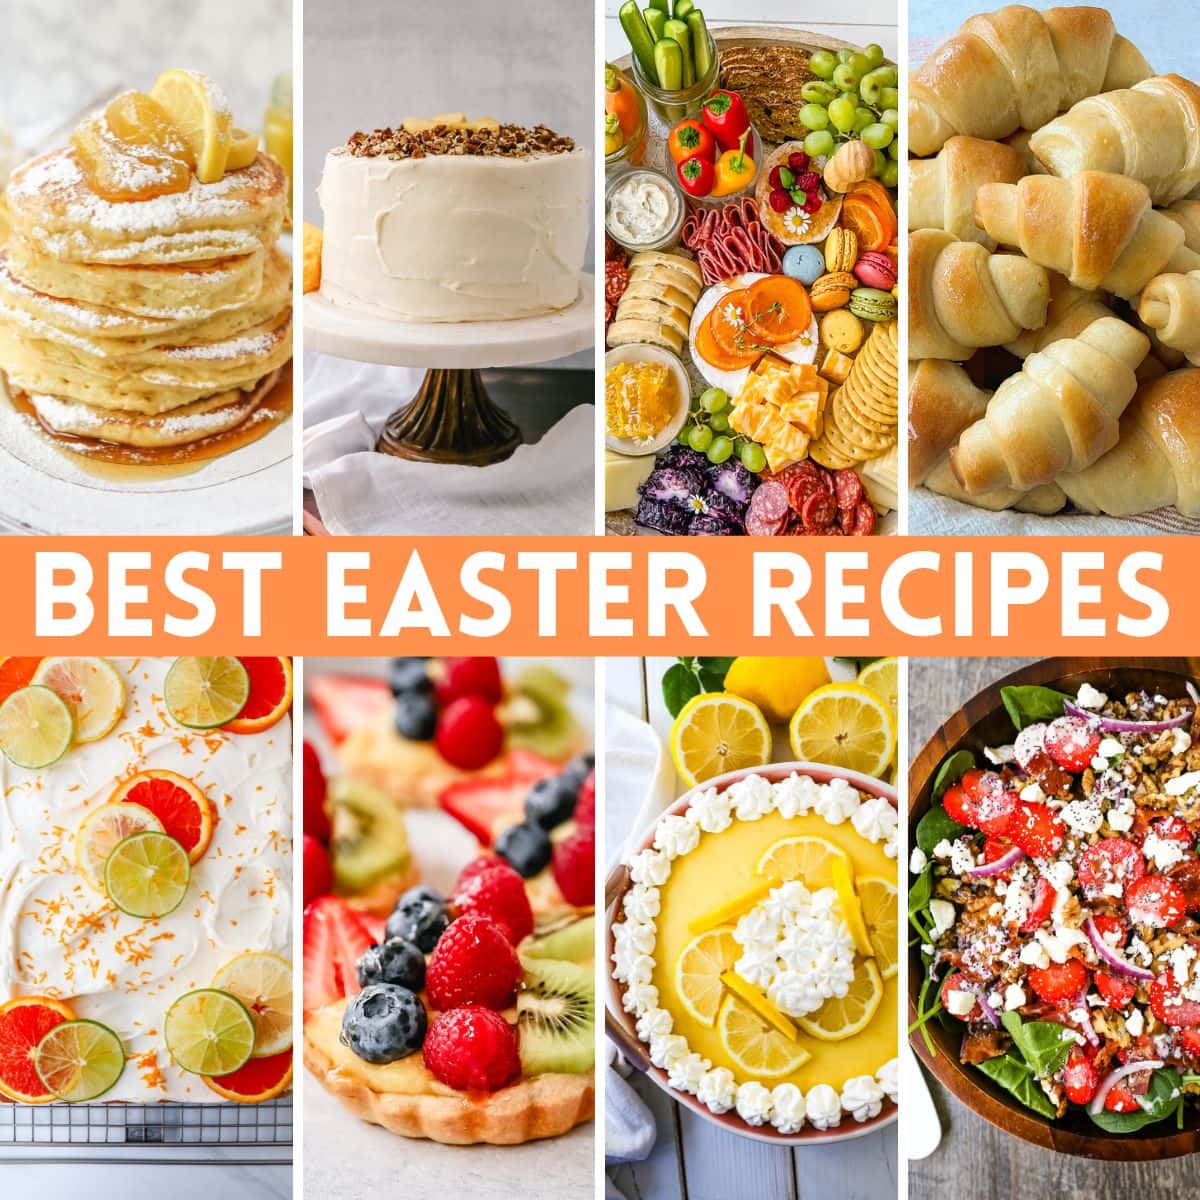 I am sharing the BEST EASTER RECIPES. Are you wondering what to serve on Easter? Here are 80 Easter Recipes from Easter Breakfast and Brunch to Easter Side Dishes to Easter Dinner Recipes to Easter Dessert Recipes. I have you covered!